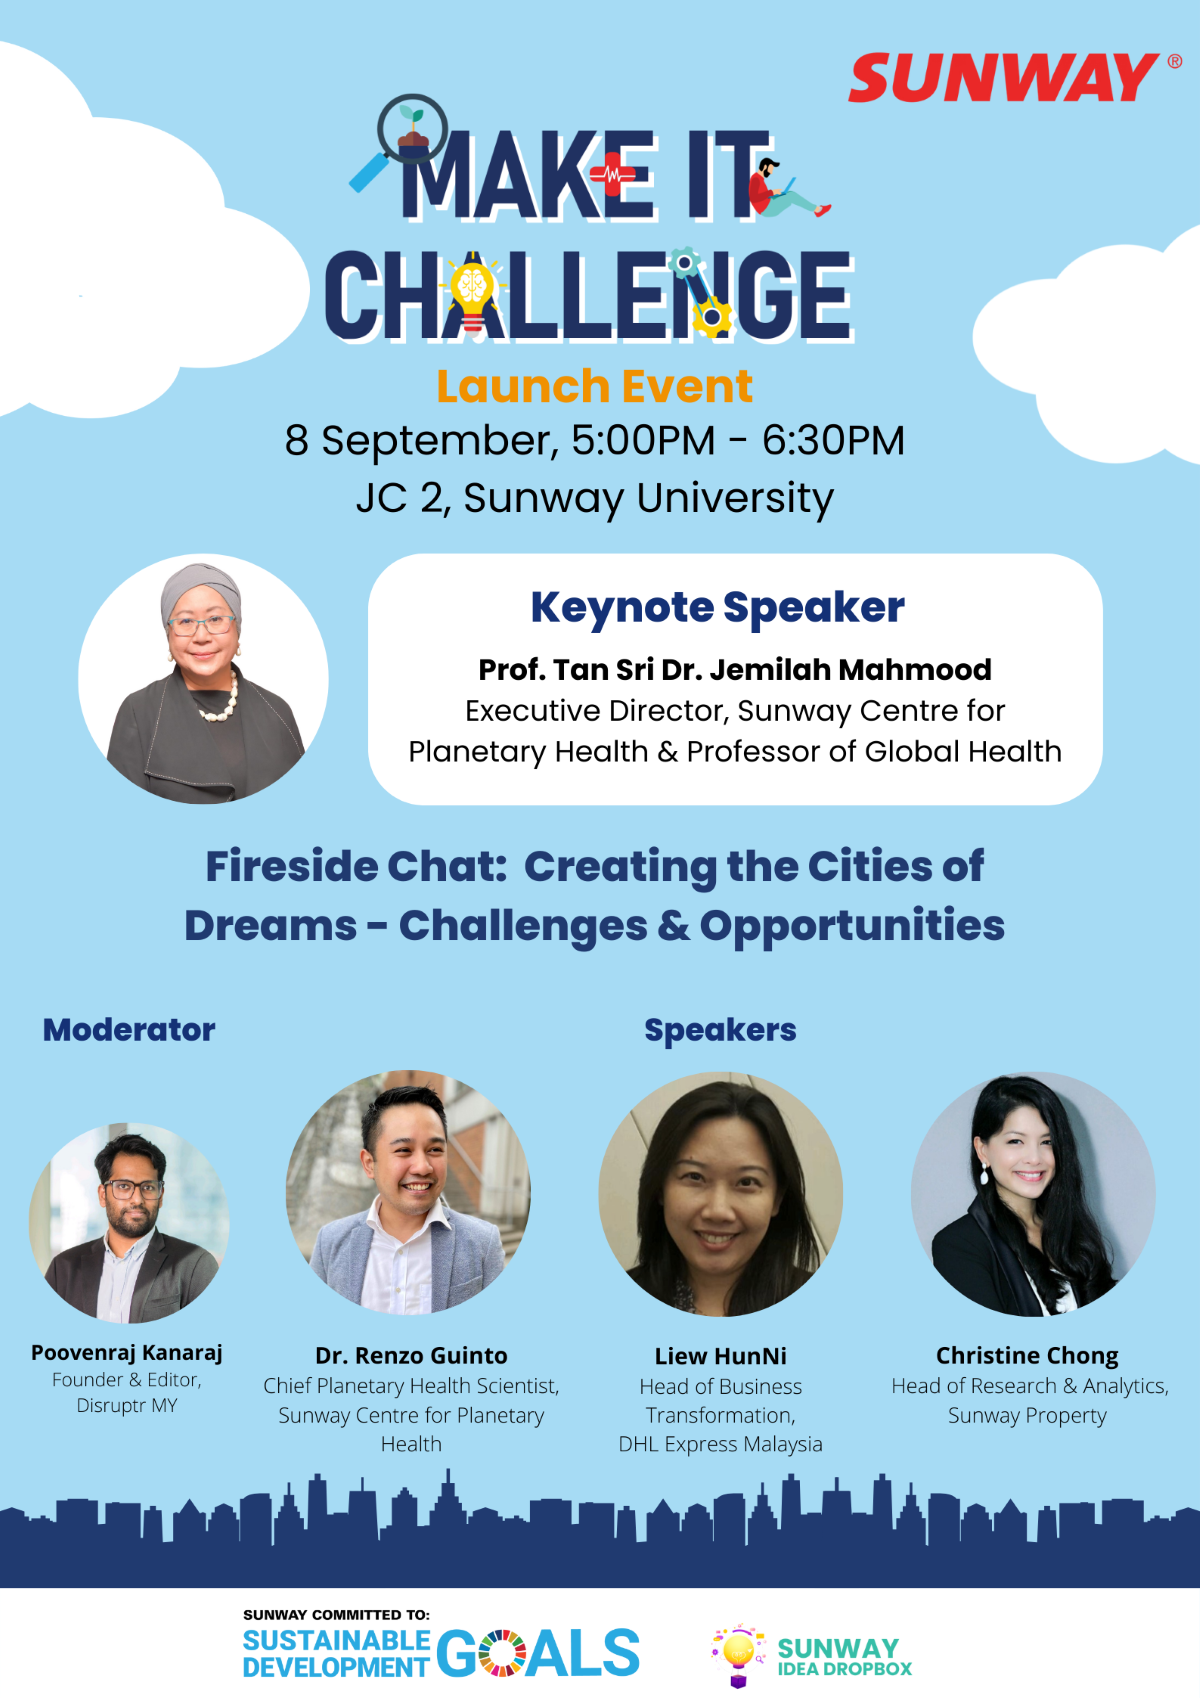 Make It Challenge poster featuring Professor Tan Sri Dr. Jemilah, as well as the Fireside Chat speakers such as chief planetary health scientist of Sunway Centre for Planetary Health, Dr. Renzo Guinto; and Sunway Property head of Research and Analytics Christine Chong Oelofse